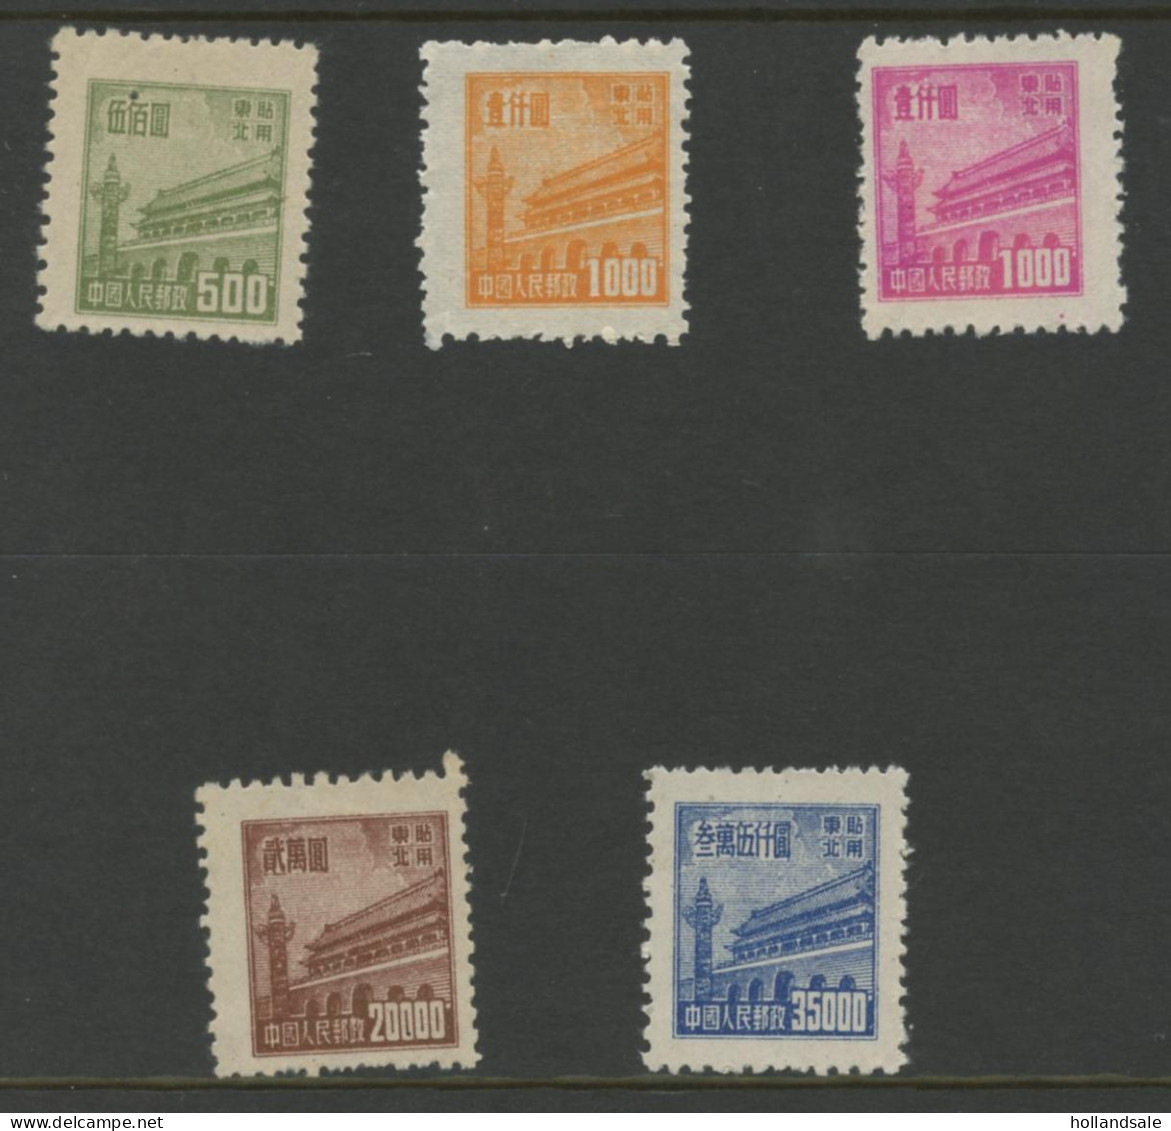 CHINA NORTH EAST - 1950 MICHEL #162, 163, 164, 169, 170. All Unused. - Chine Du Nord-Est 1946-48